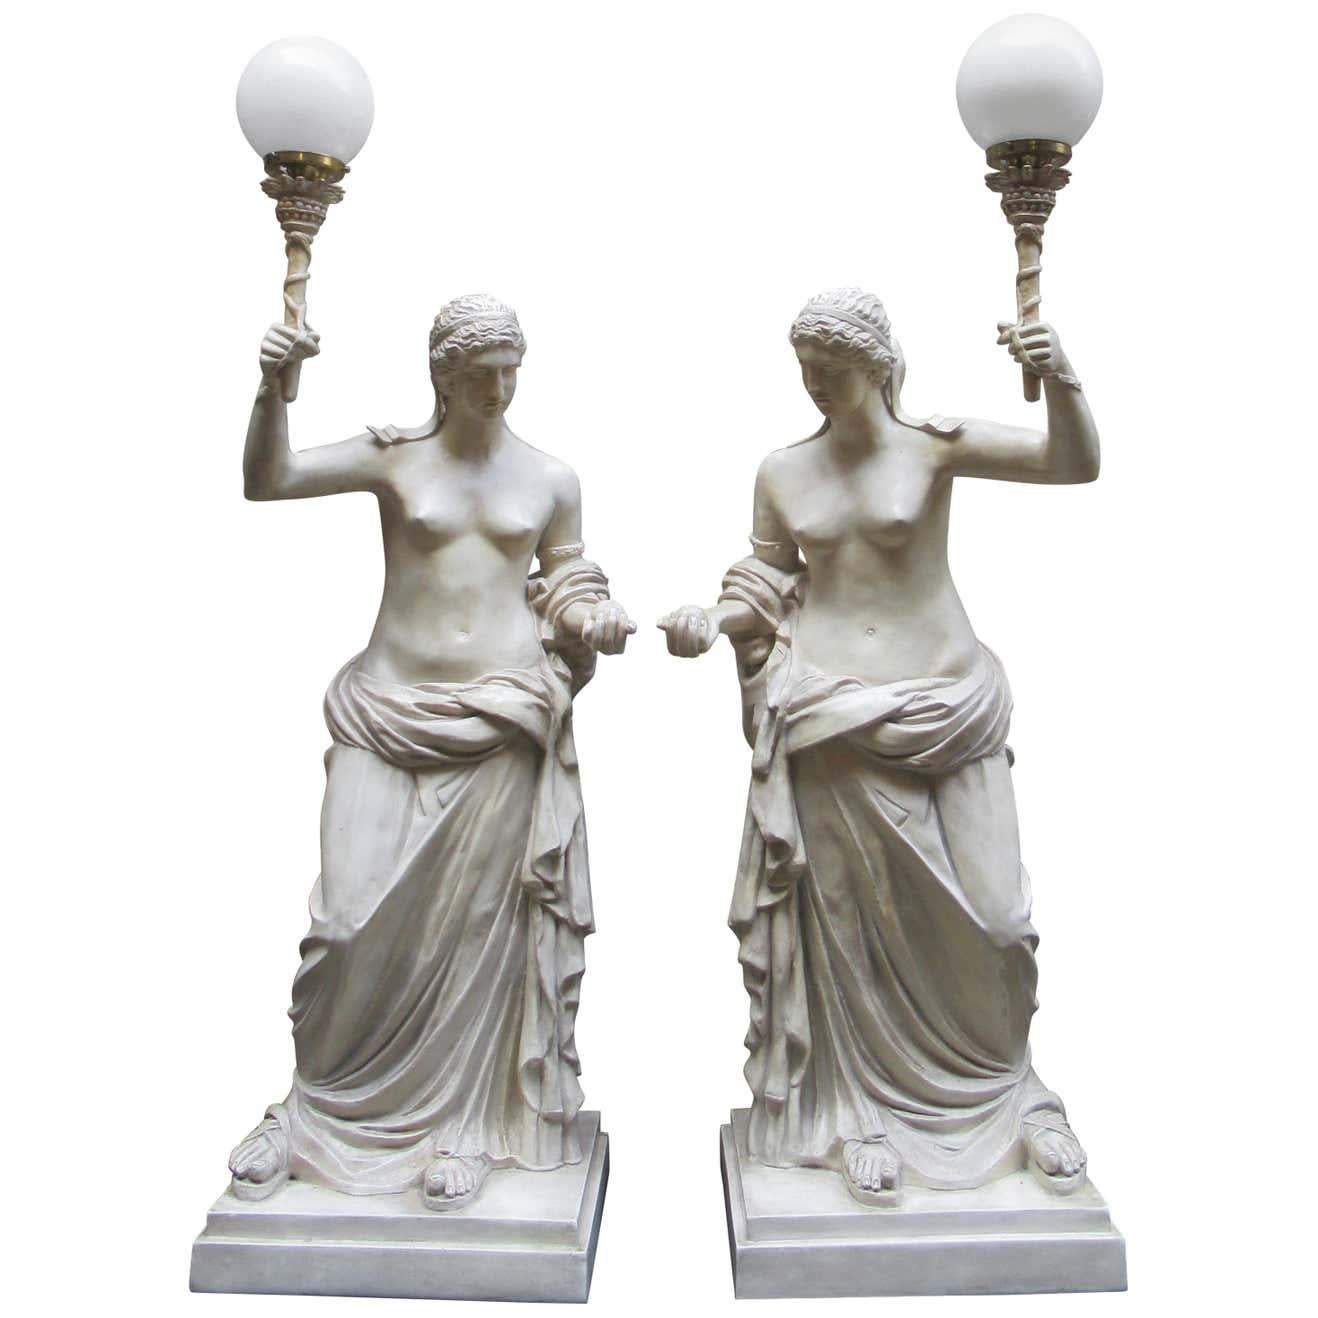 Pair of 20th century vintage Christopher Wray plaster figural lamps depicting Roman women, signed by artist. M. Osman.